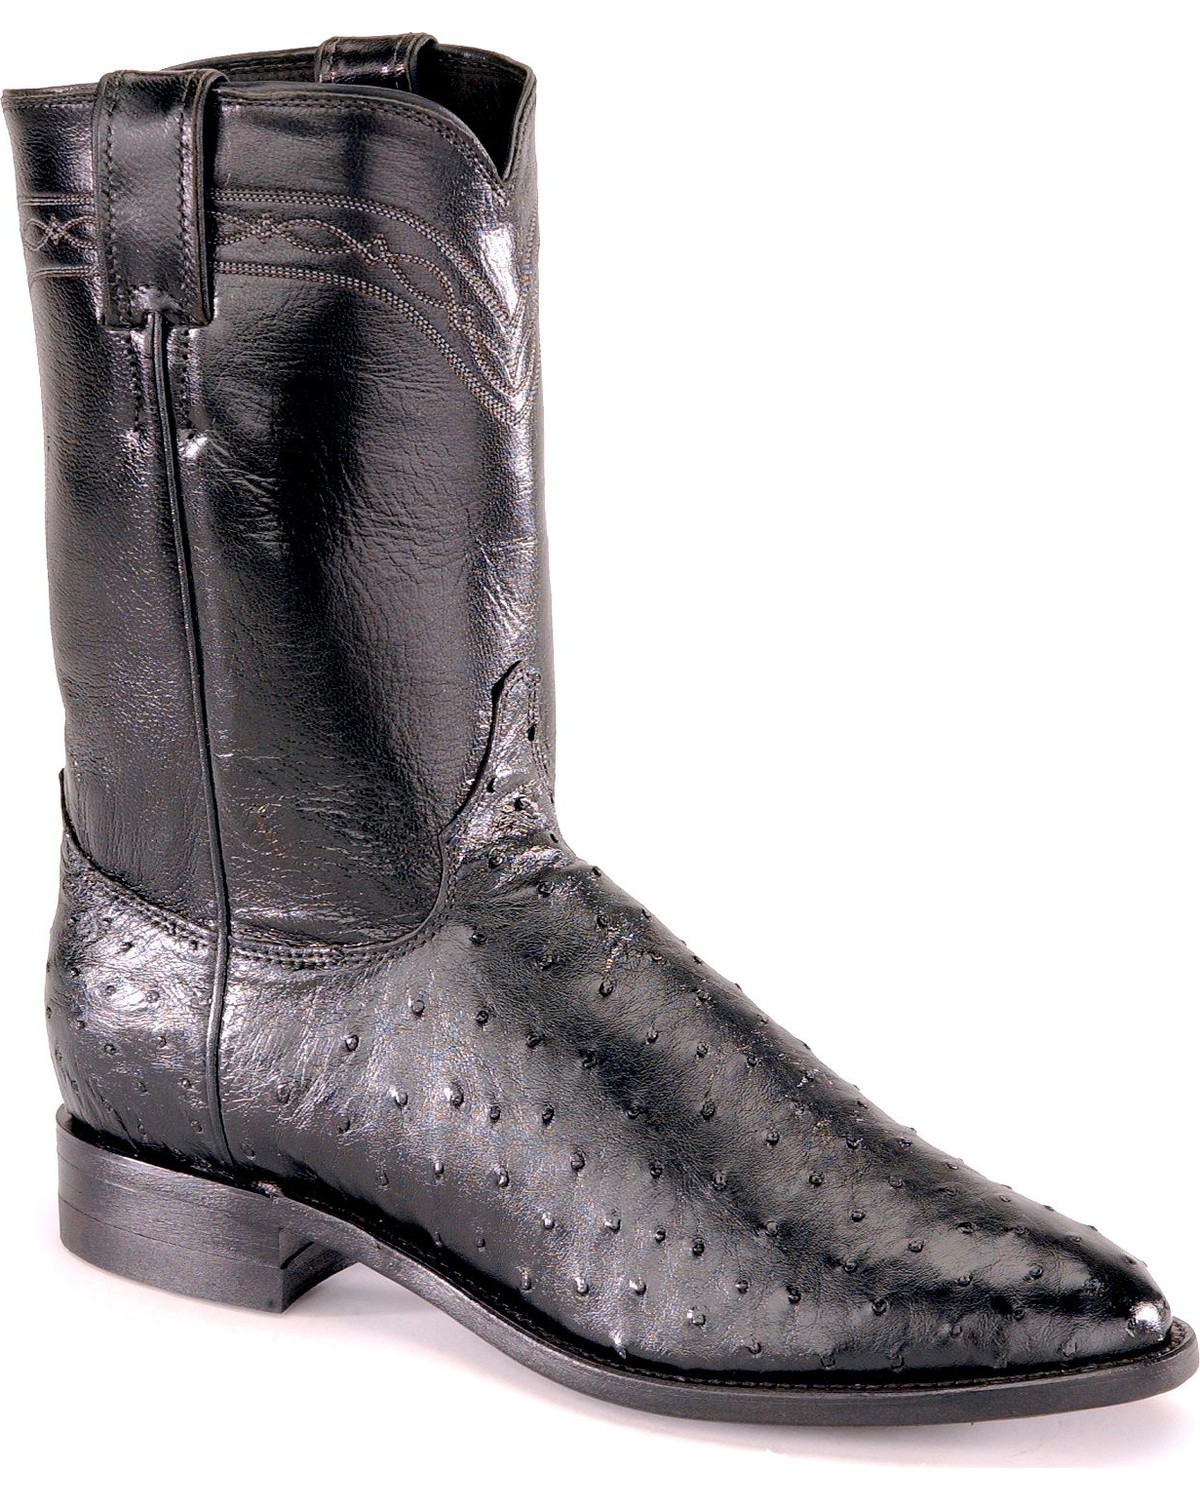 justin boots ropers black